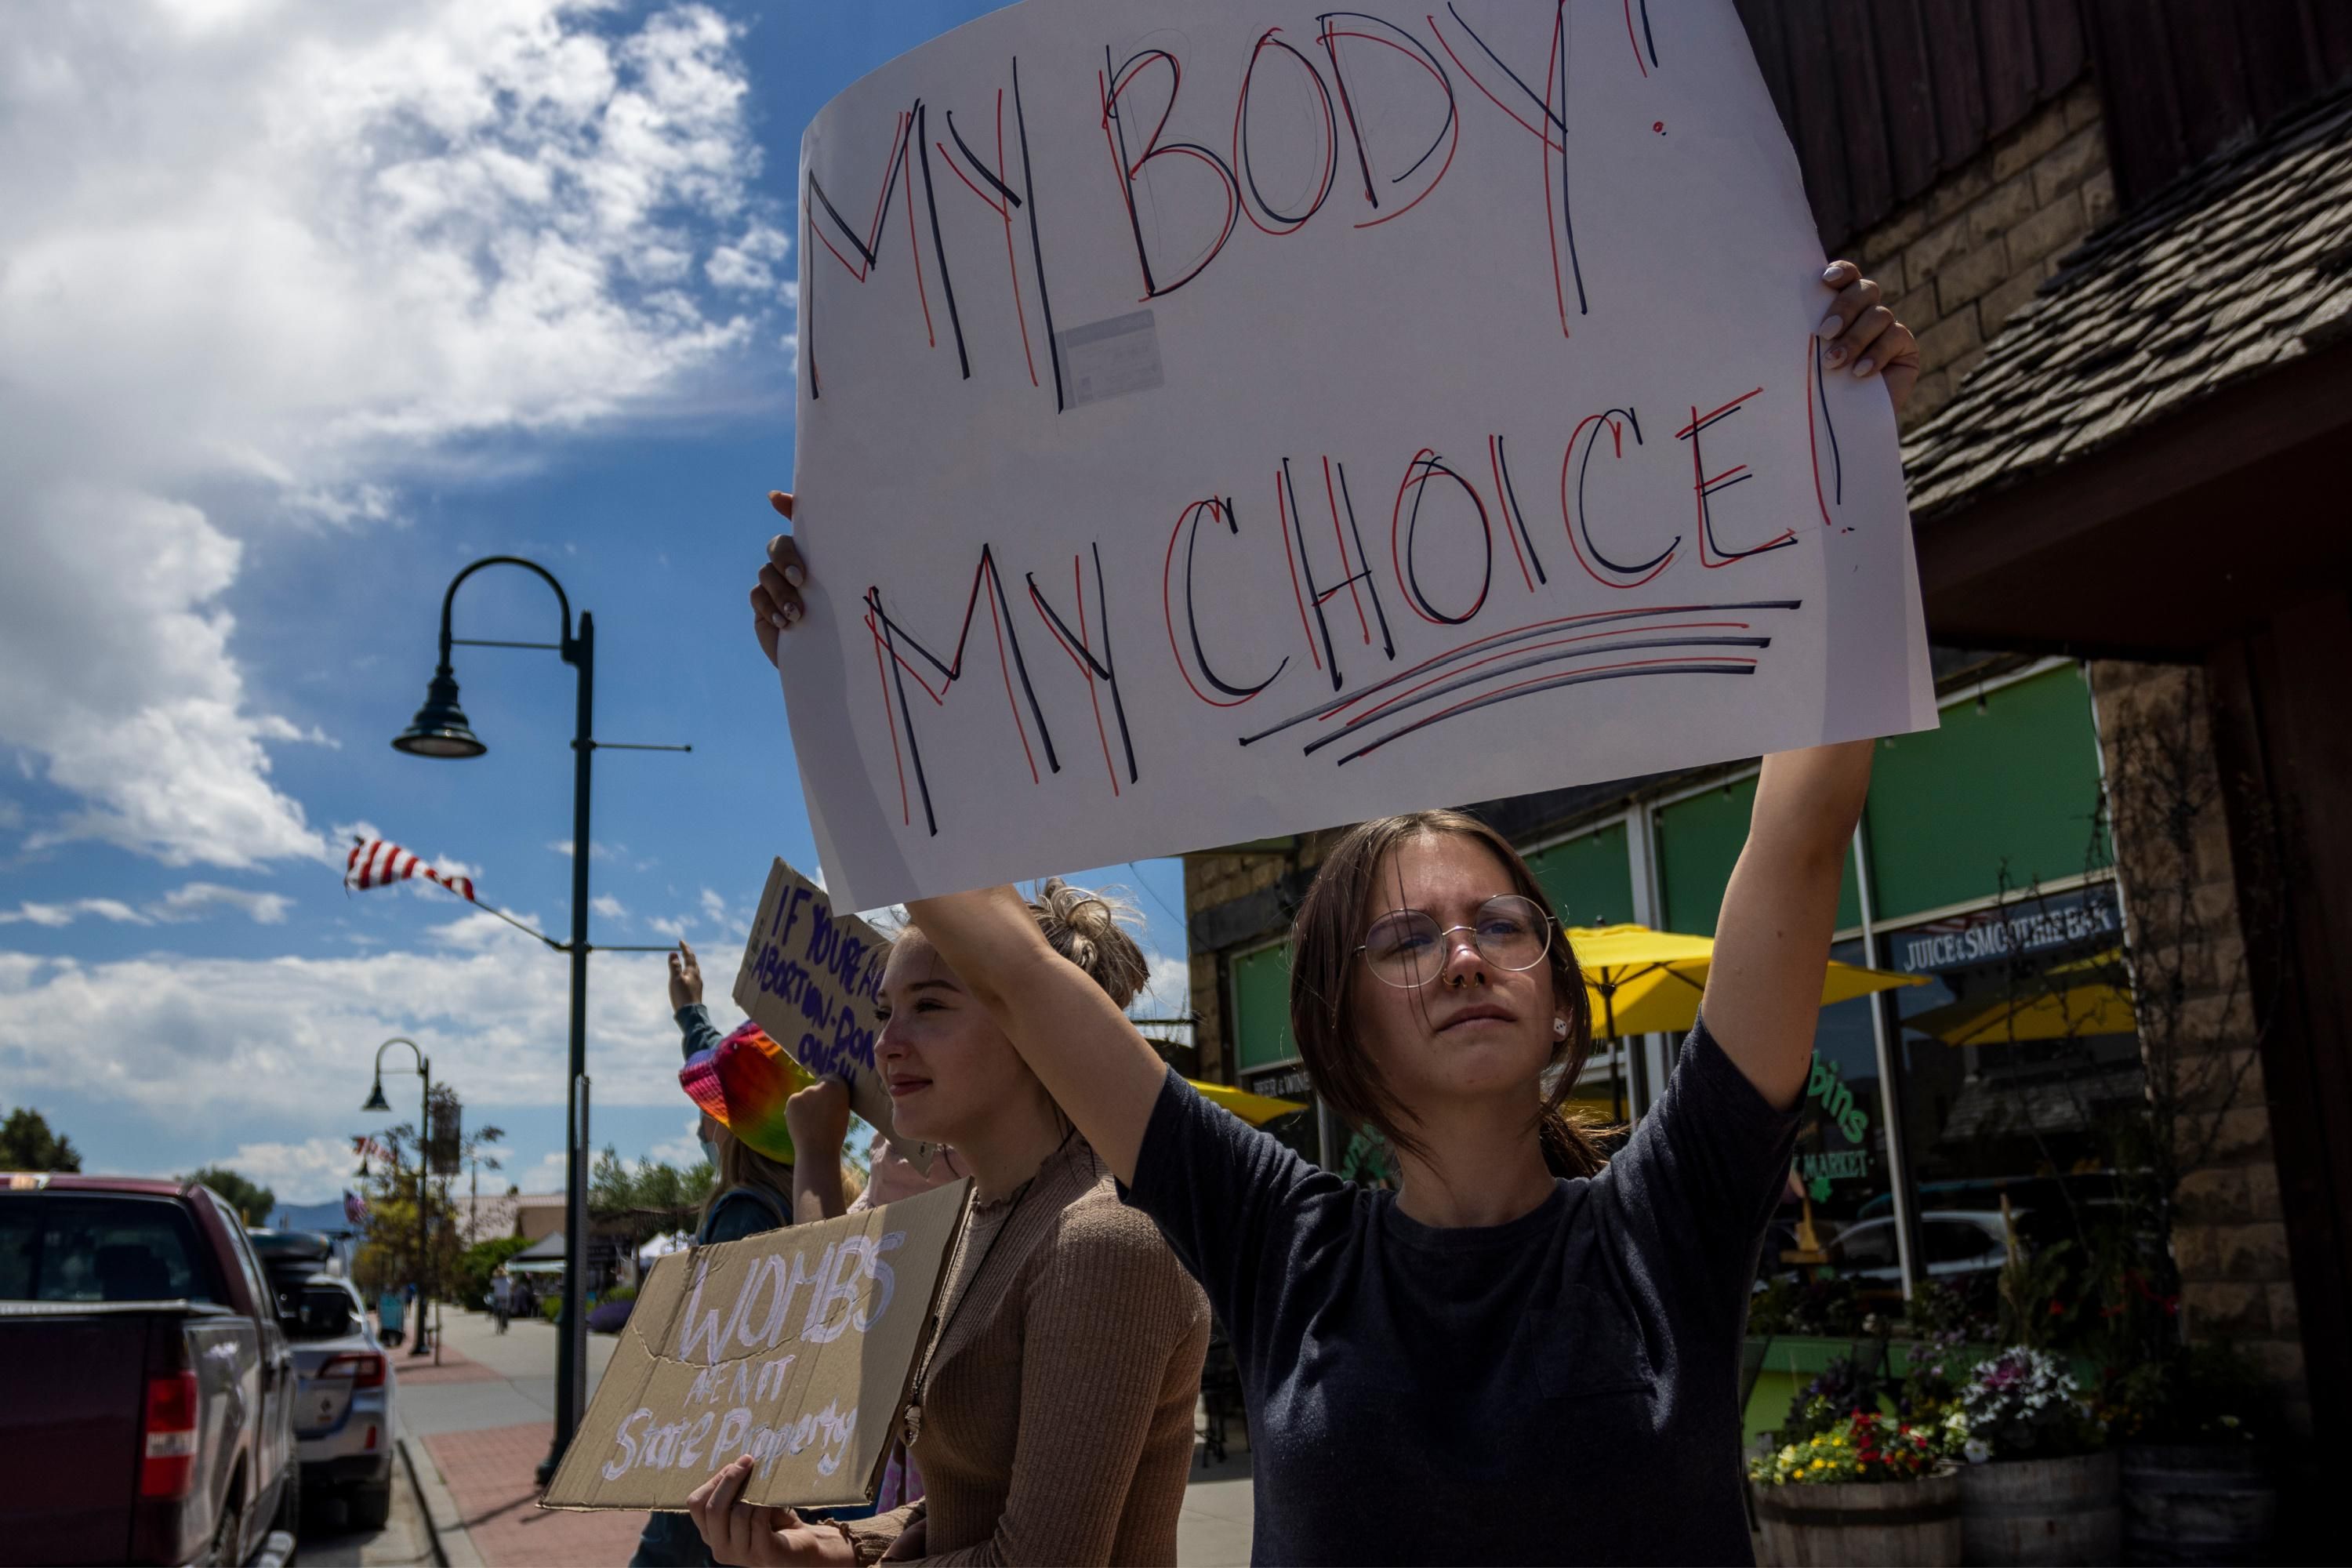 Abortion rights protest in Idaho